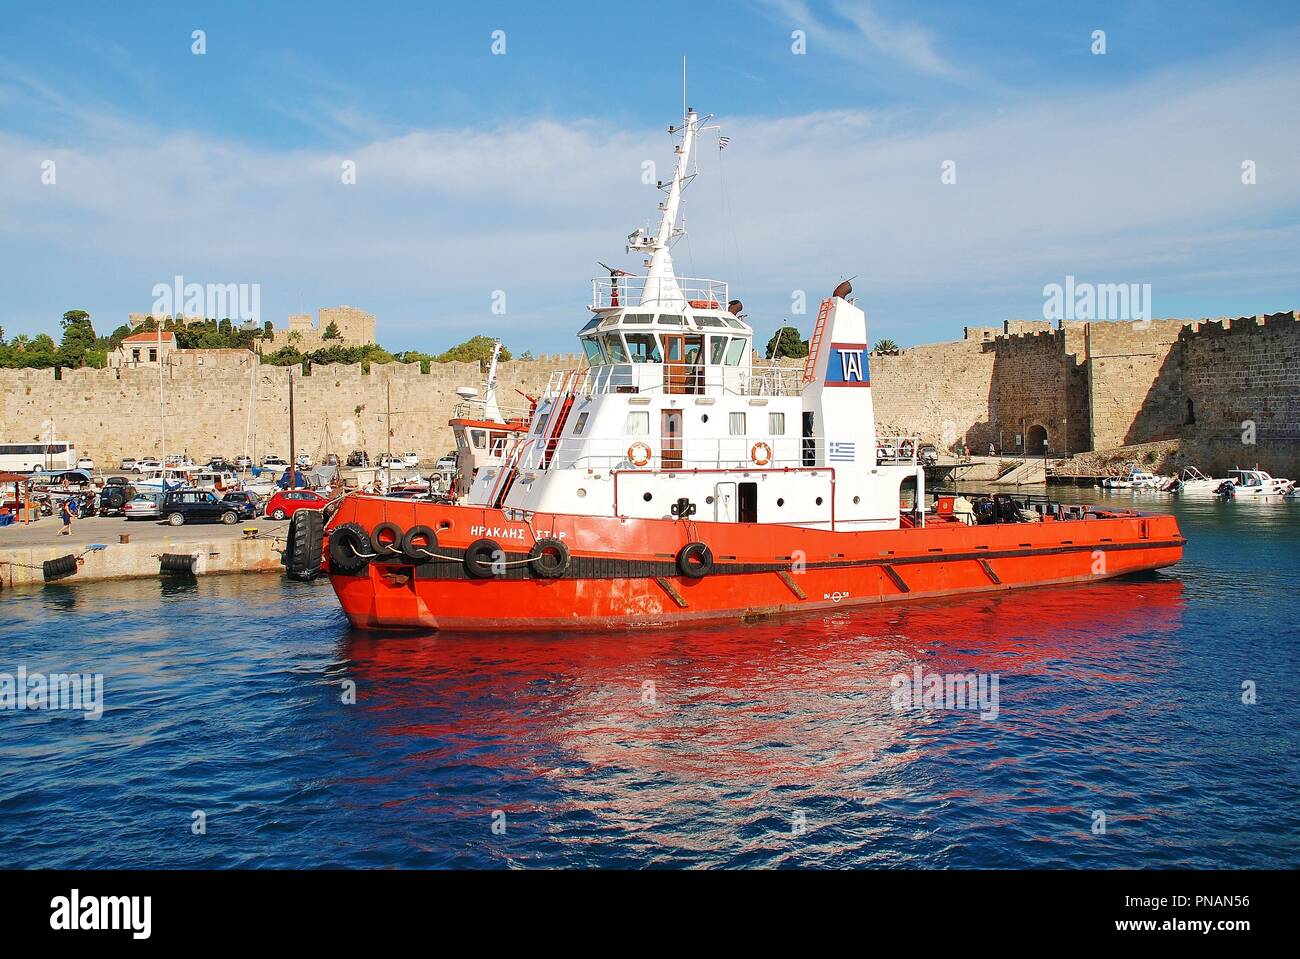 Tugboat Heracles Star moored at Kolona port in Rhodes Old Town on the Greek island of Rhodes on June 12, 2018. The 31mtr vessel was built in 2002. Stock Photo